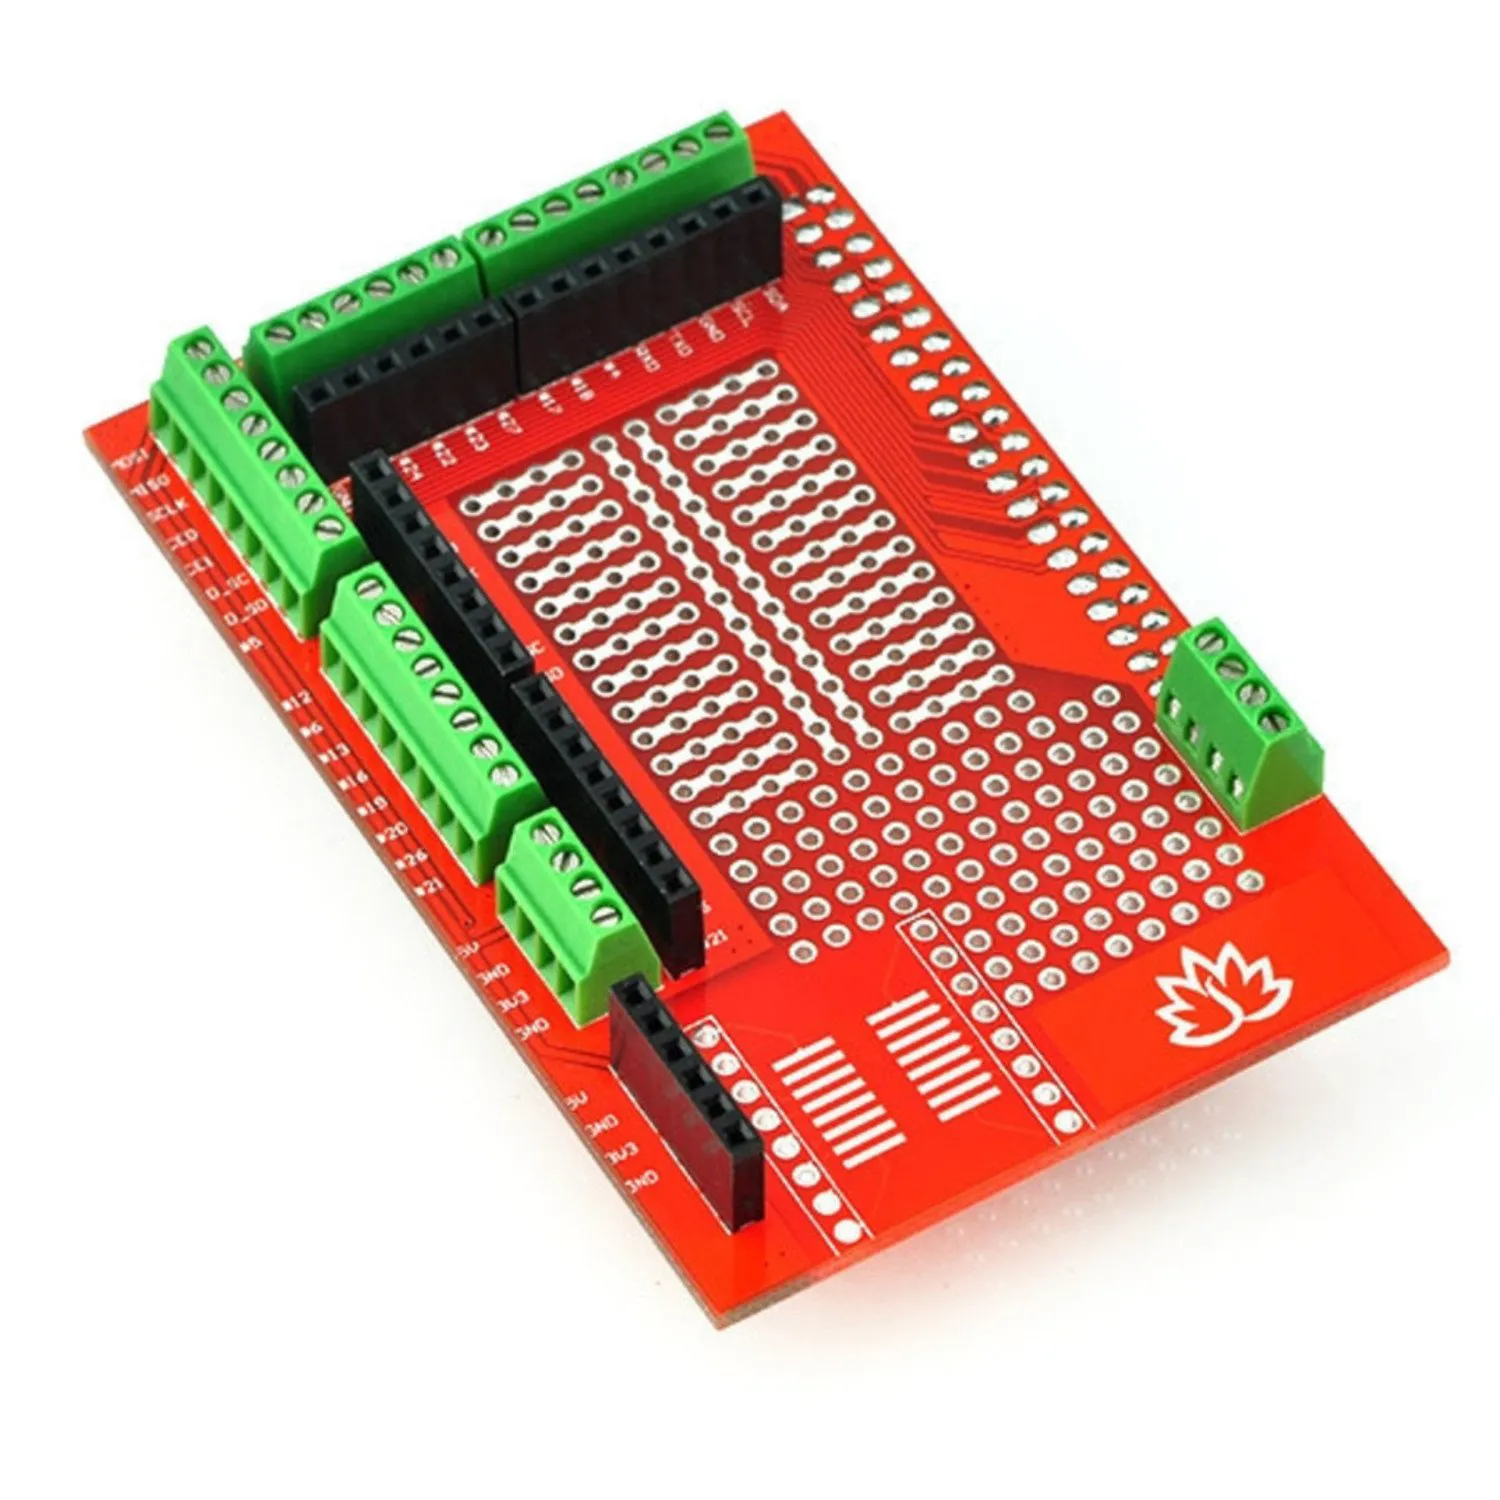 Photo of Prototyping Shield for Raspberry Pi 2 /Model A+/Model B+